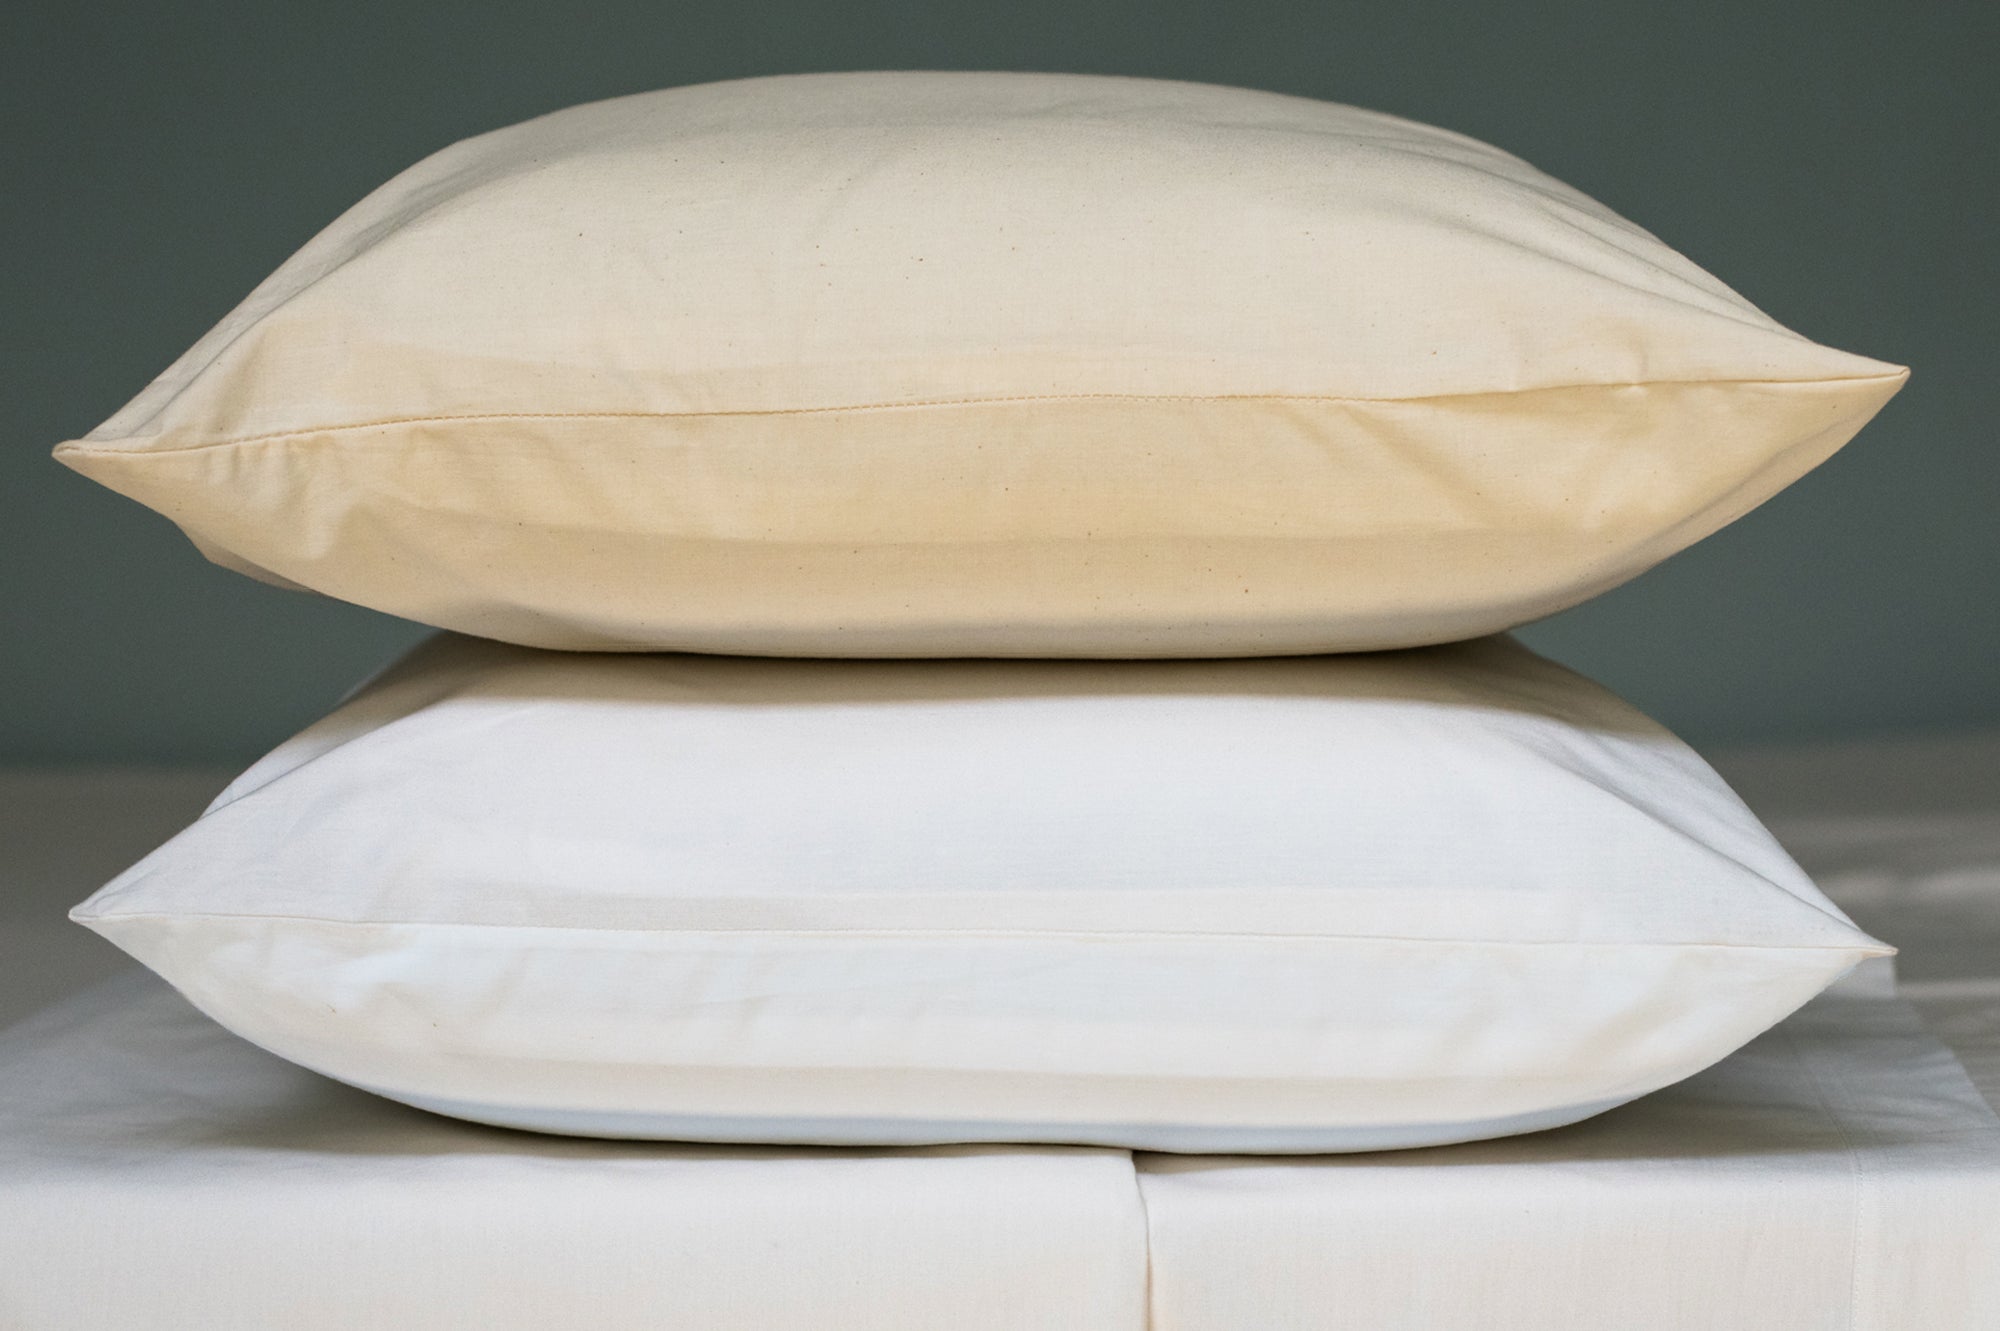 Organic cotton pillowcases in natural and white color with pillows stacked on a bed.